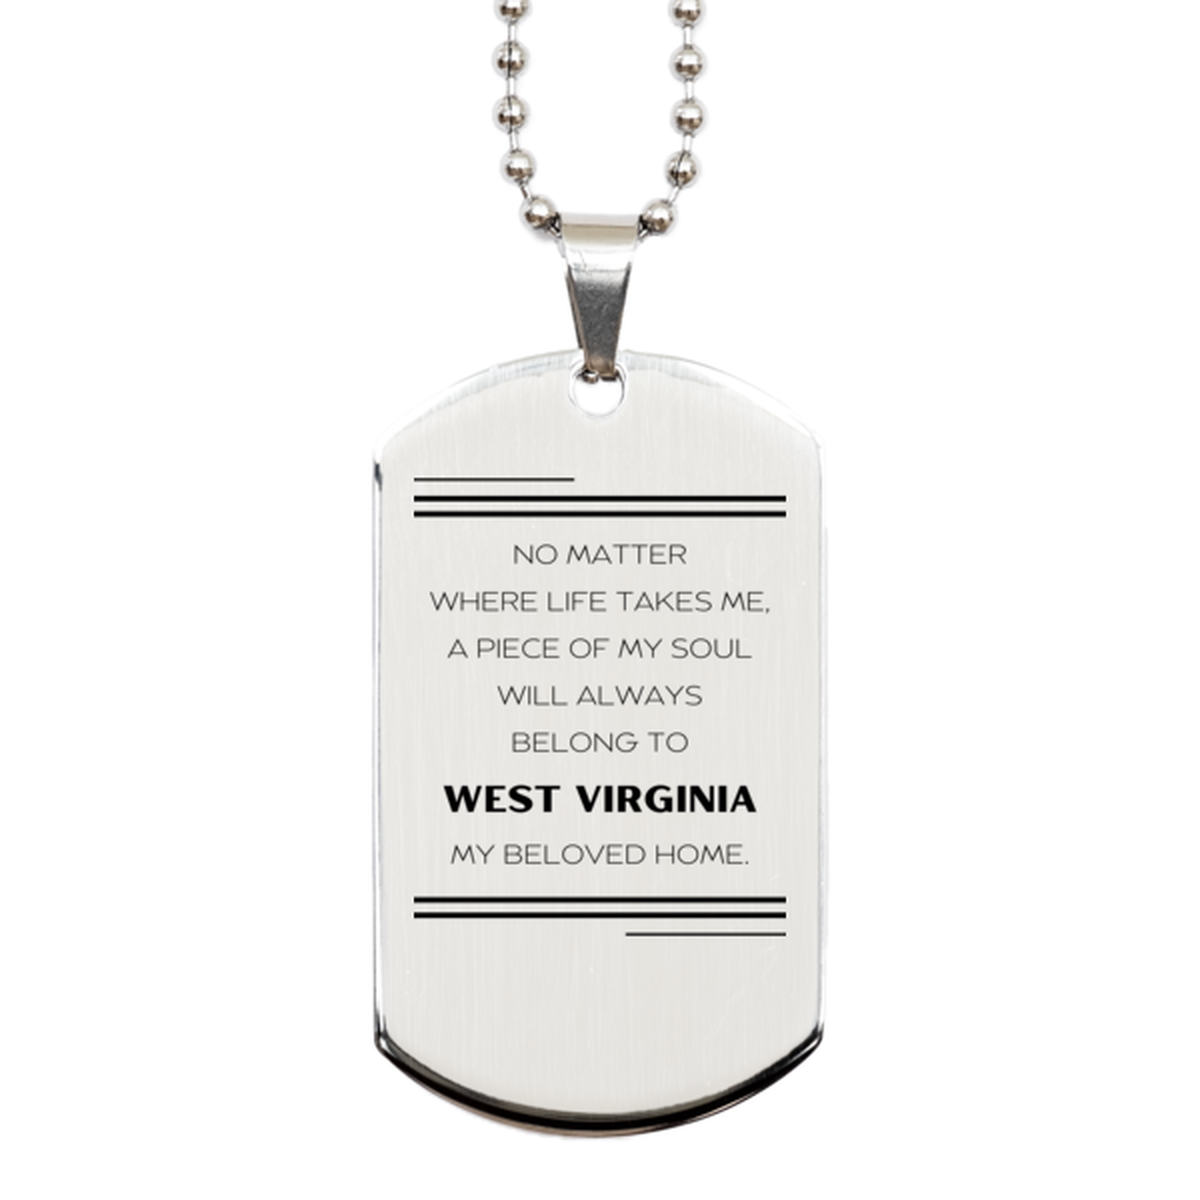 Love West Virginia State Gifts, My soul will always belong to West Virginia, Proud Silver Dog Tag, Birthday Unique Gifts For West Virginia Men, Women, Friends